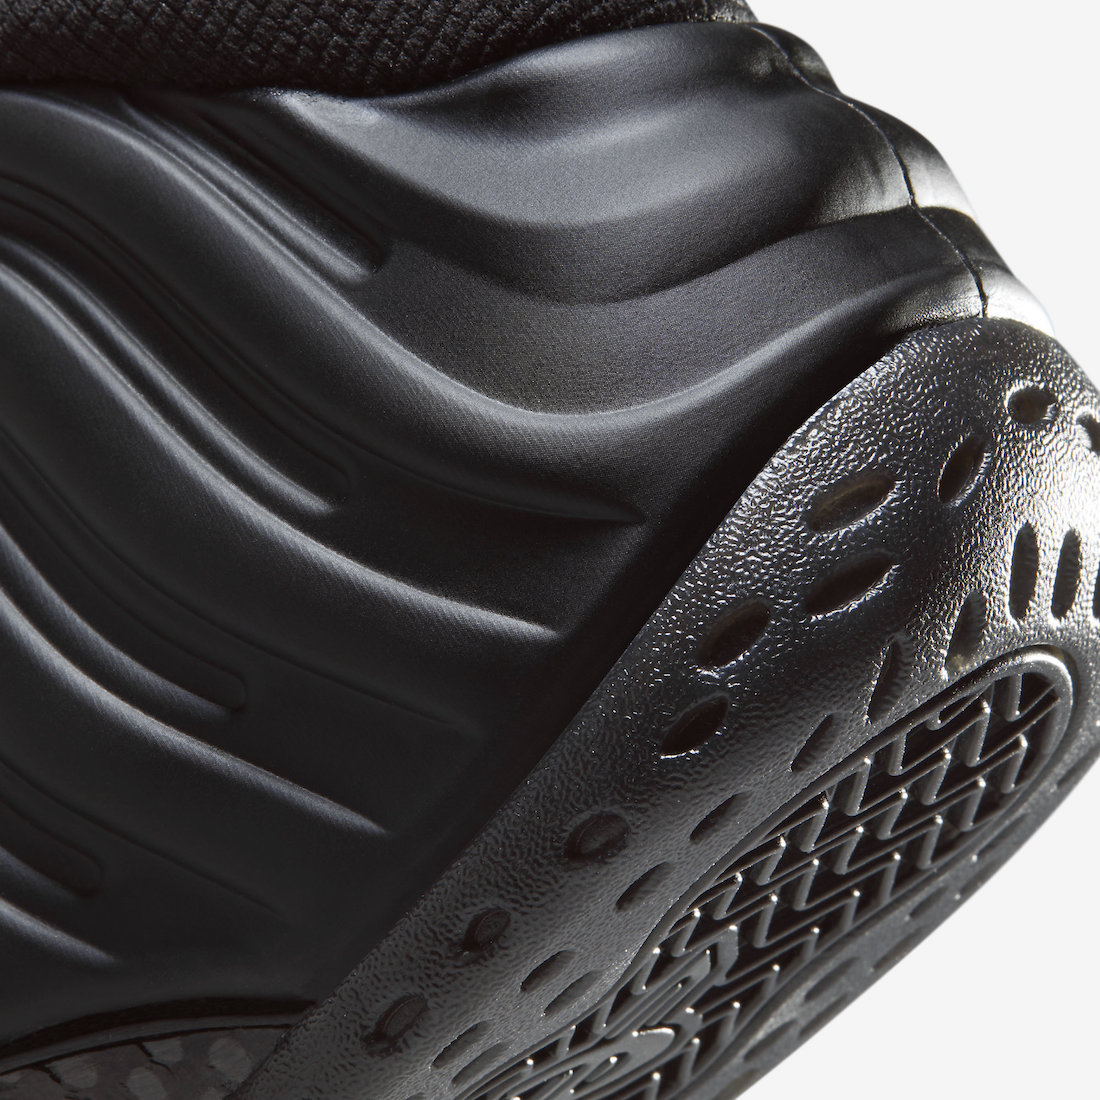 Nike-Air-Foamposite-One-Anthracite-2023-FD5855-001-Release-Date-7.jpg